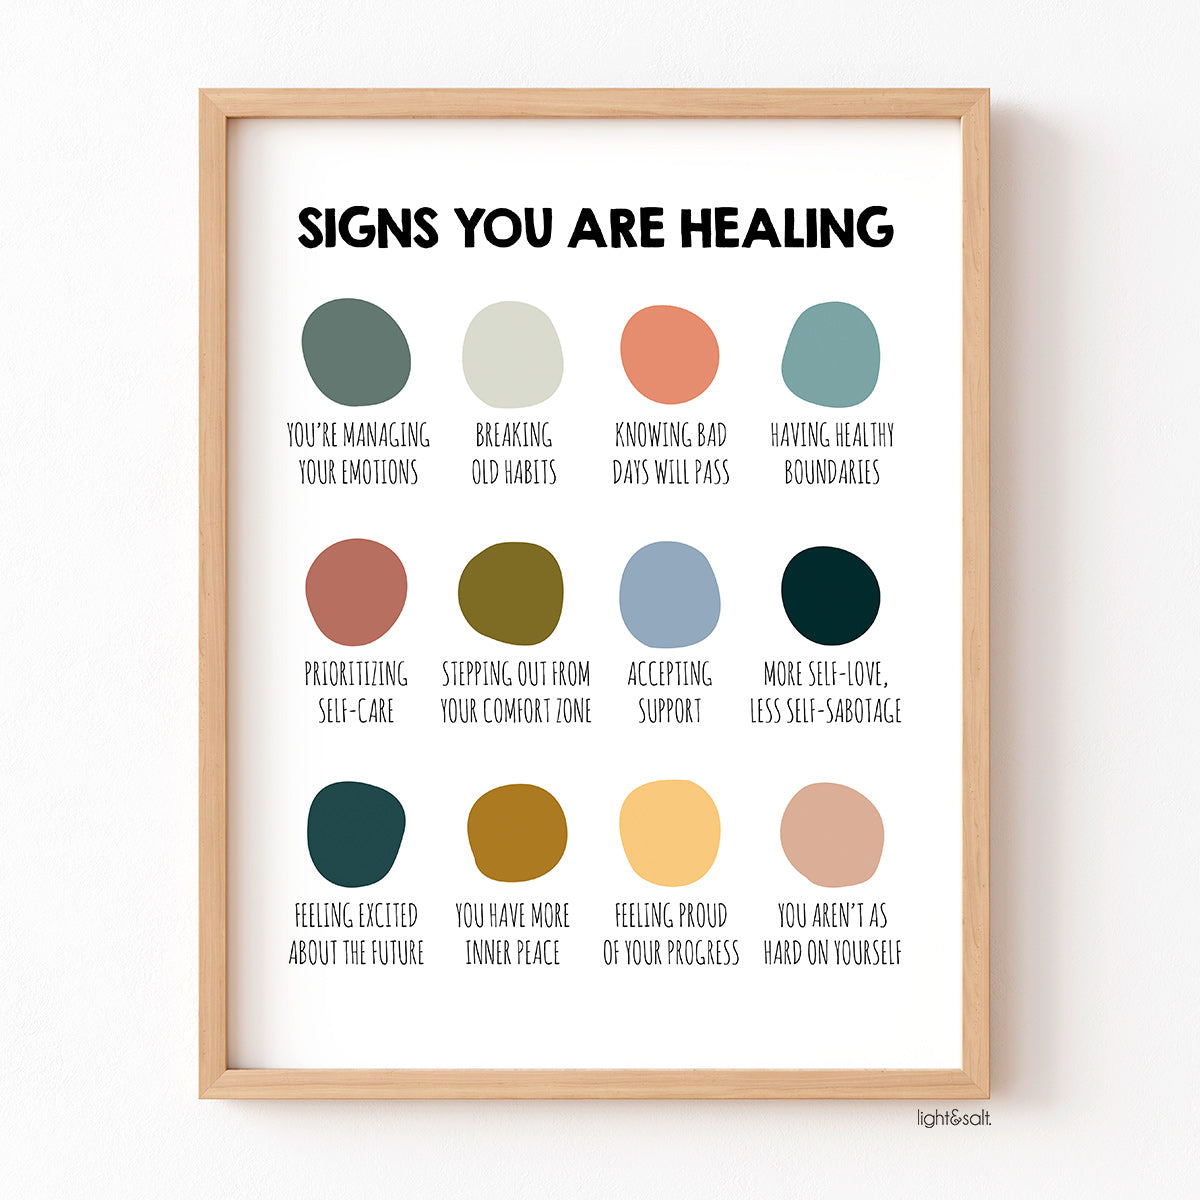 Signs you are healing poster